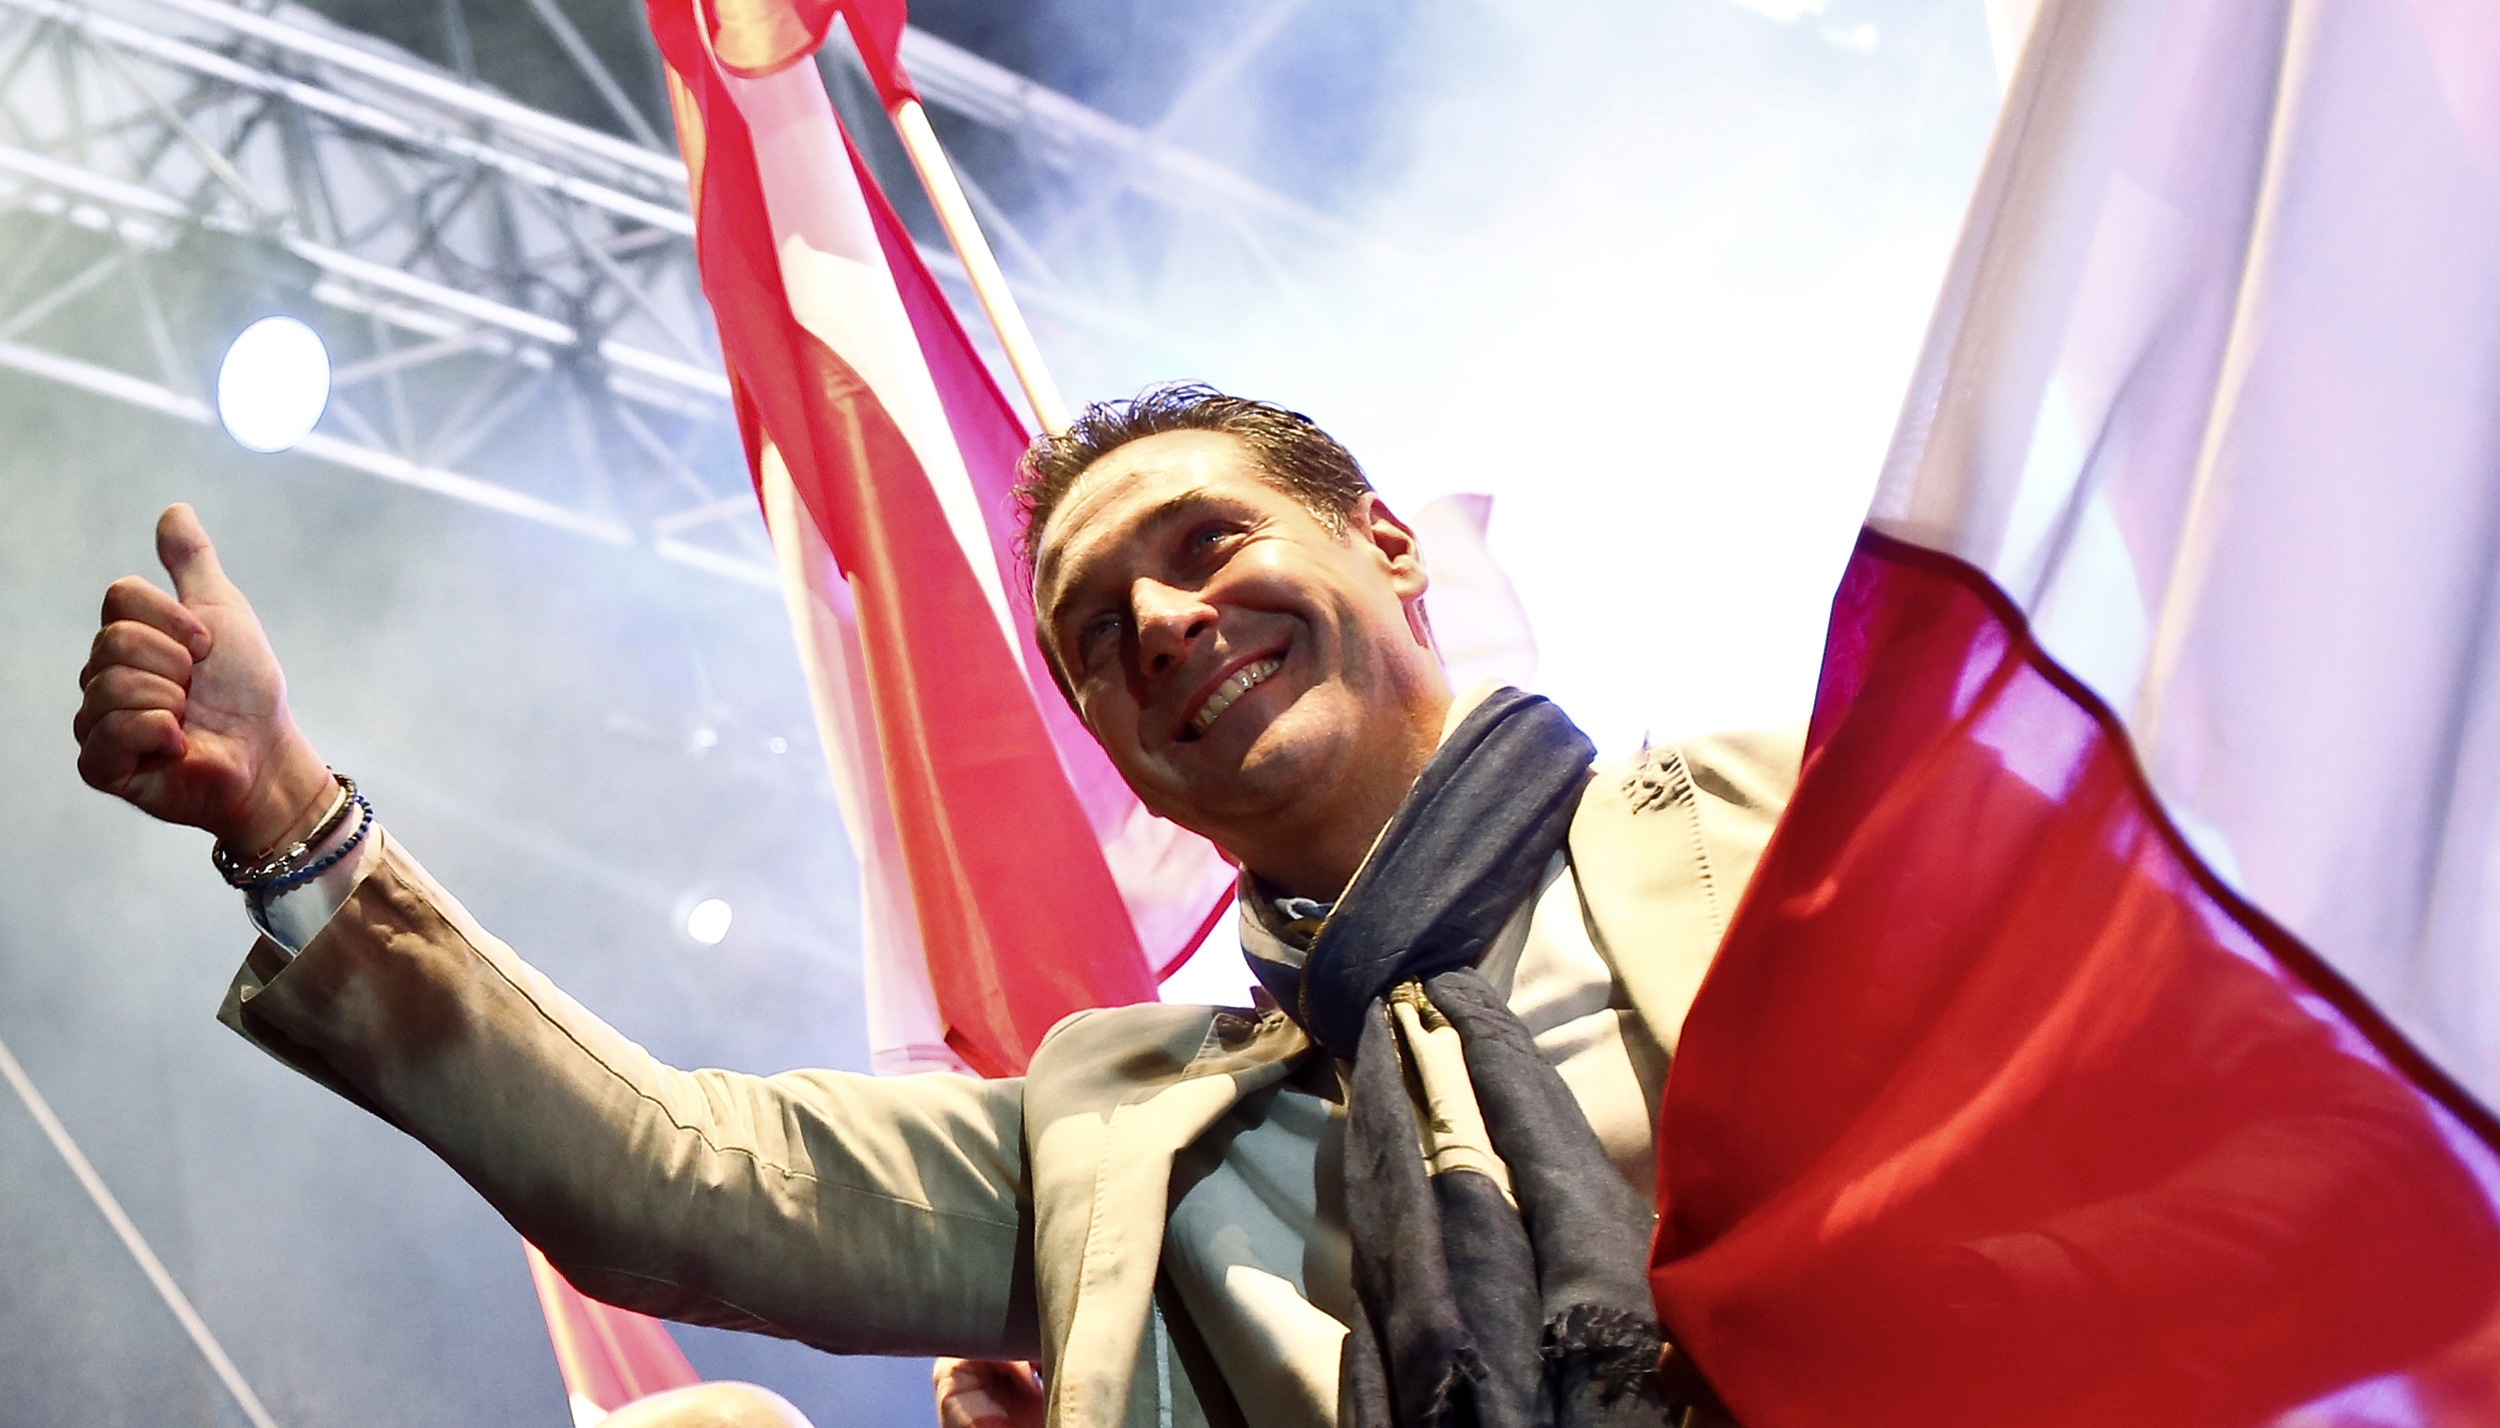 Head of Austrian Freedom Party Strache gestures during the final election rally in Vienna. Photo: AFP